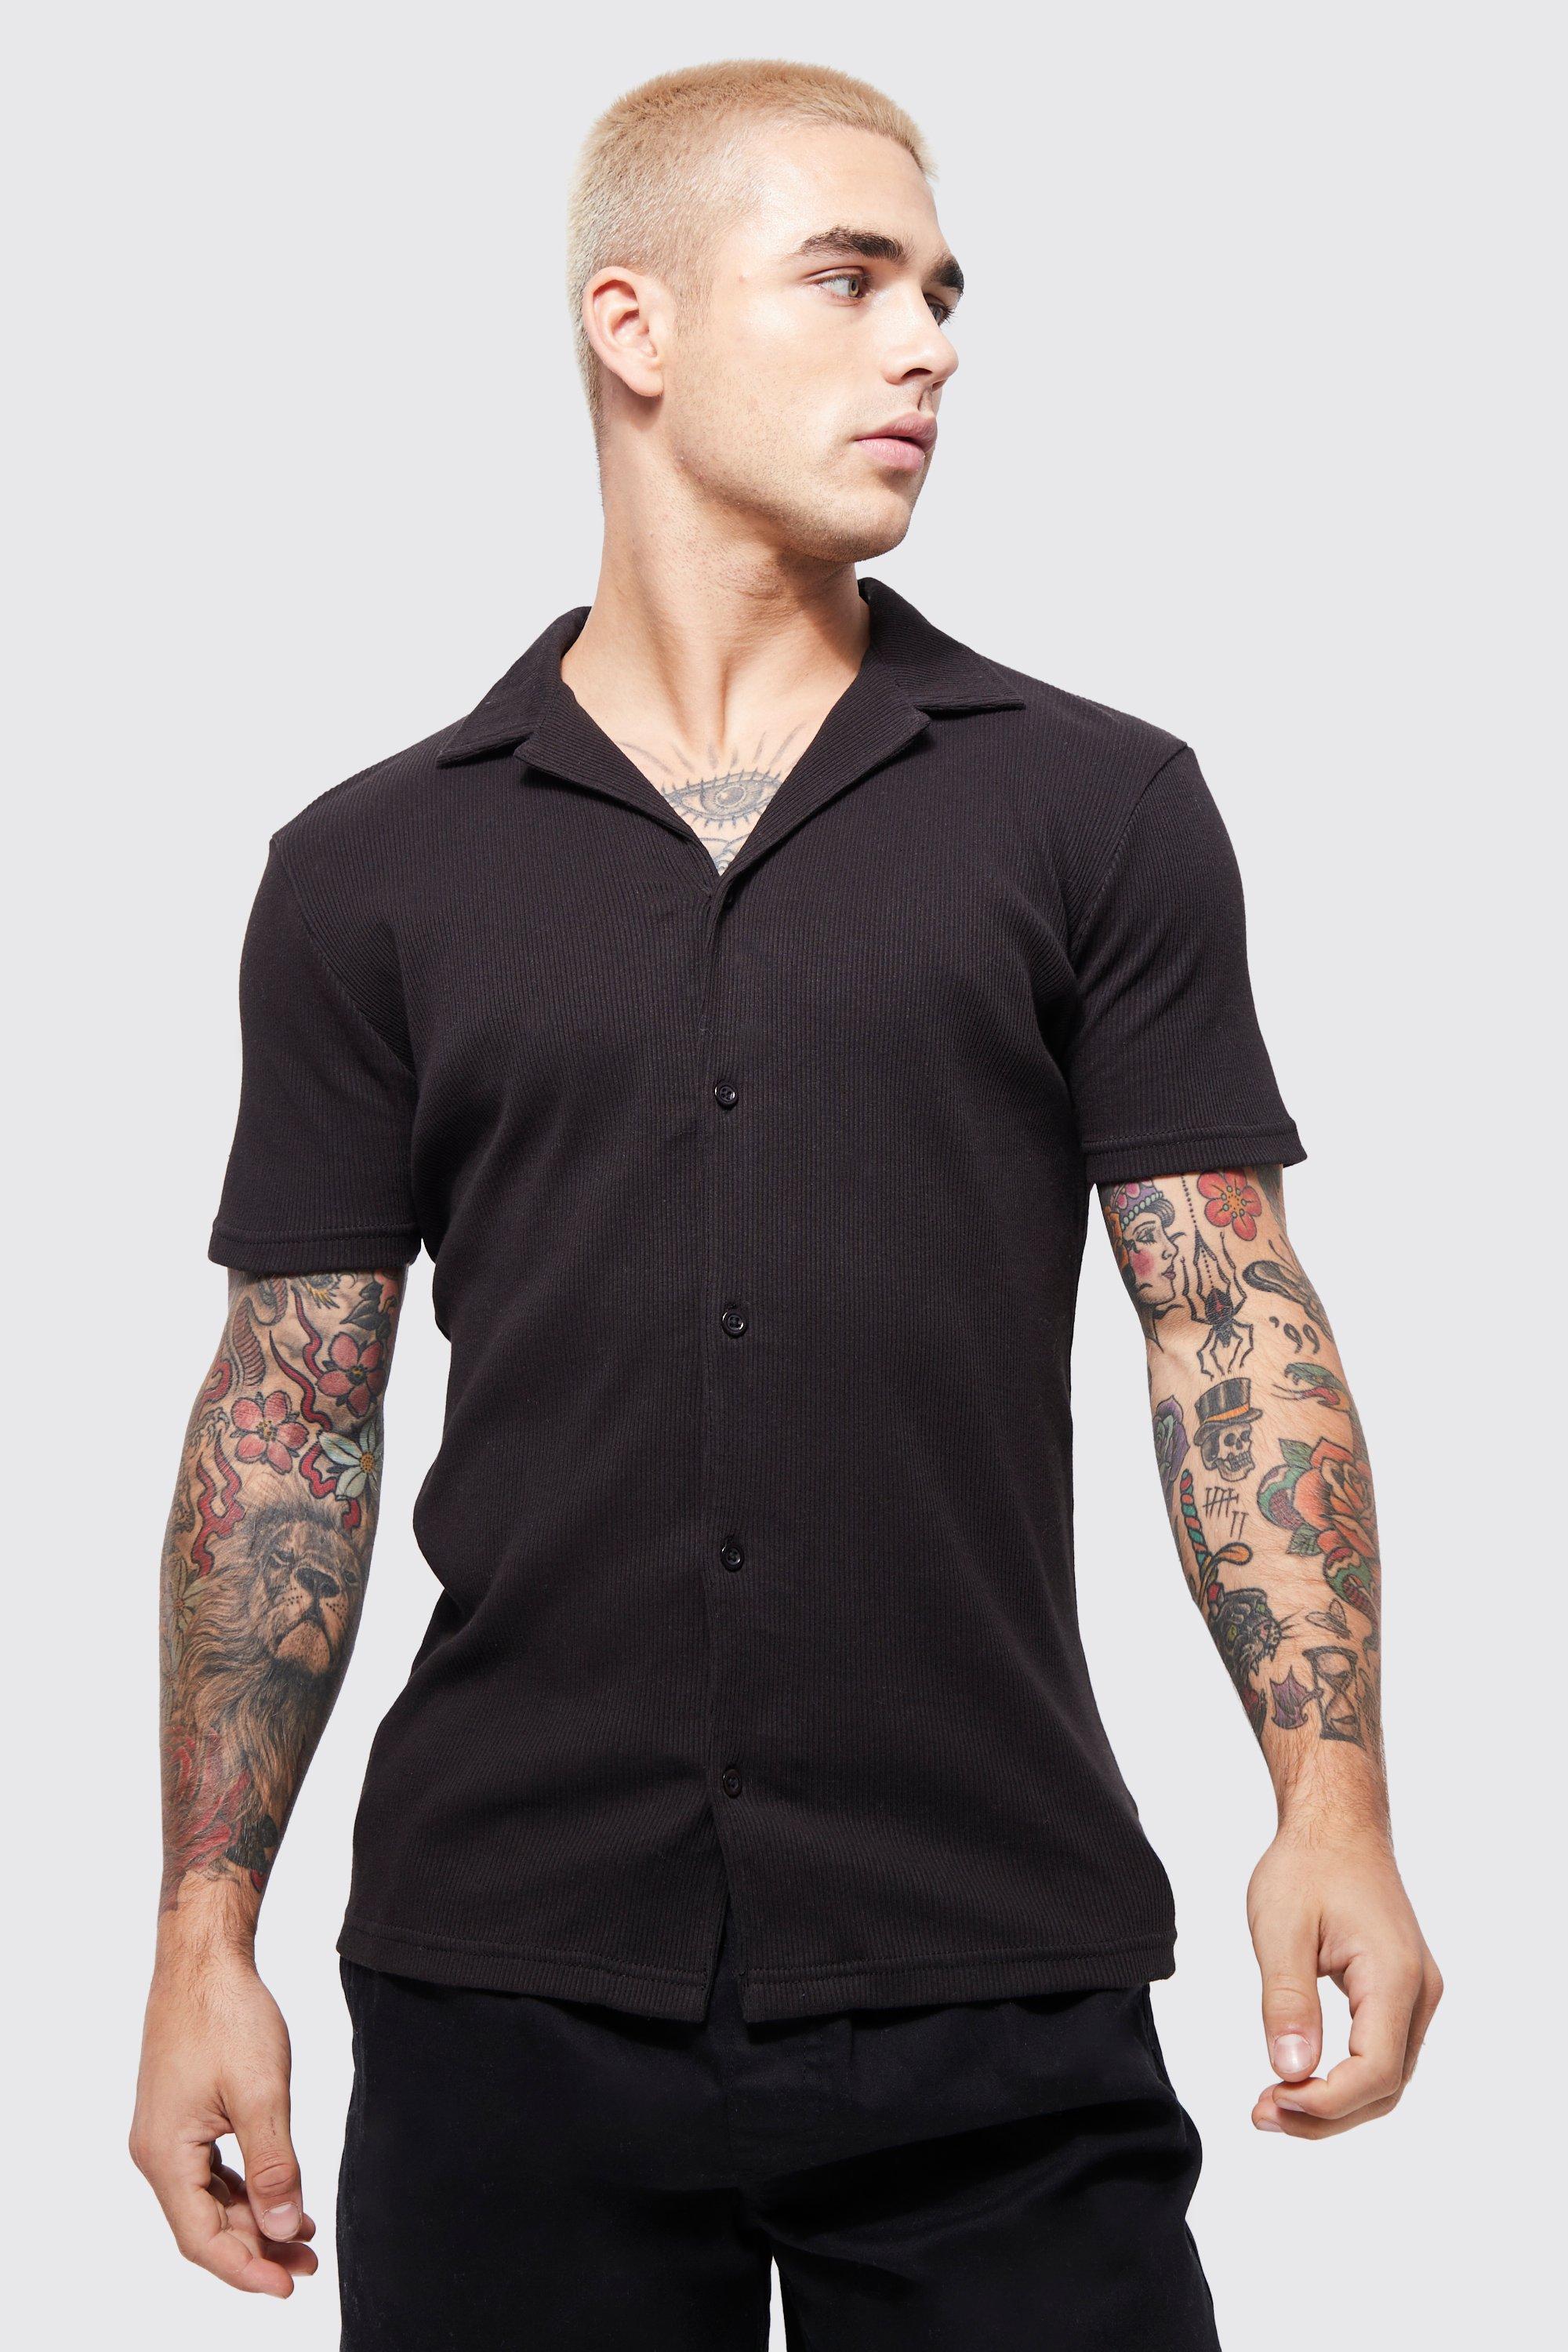 Black Collared Top Short Sleeve Button Up Rib Jersey